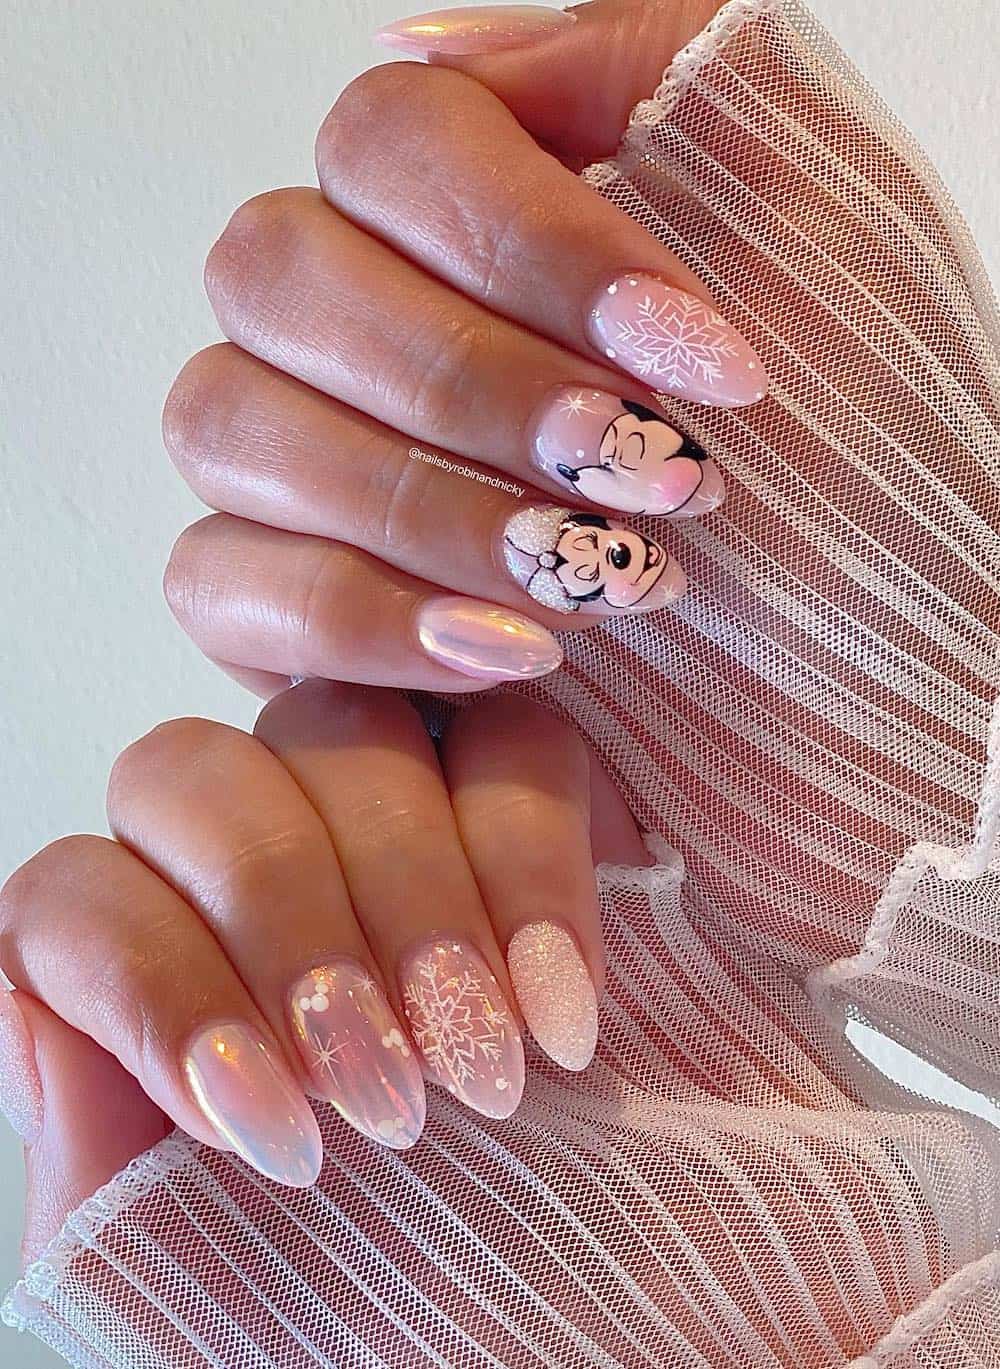 Medium almond nails with a Christmas Mickey Mouse design featuring soft pink chrome polish and snowflake details